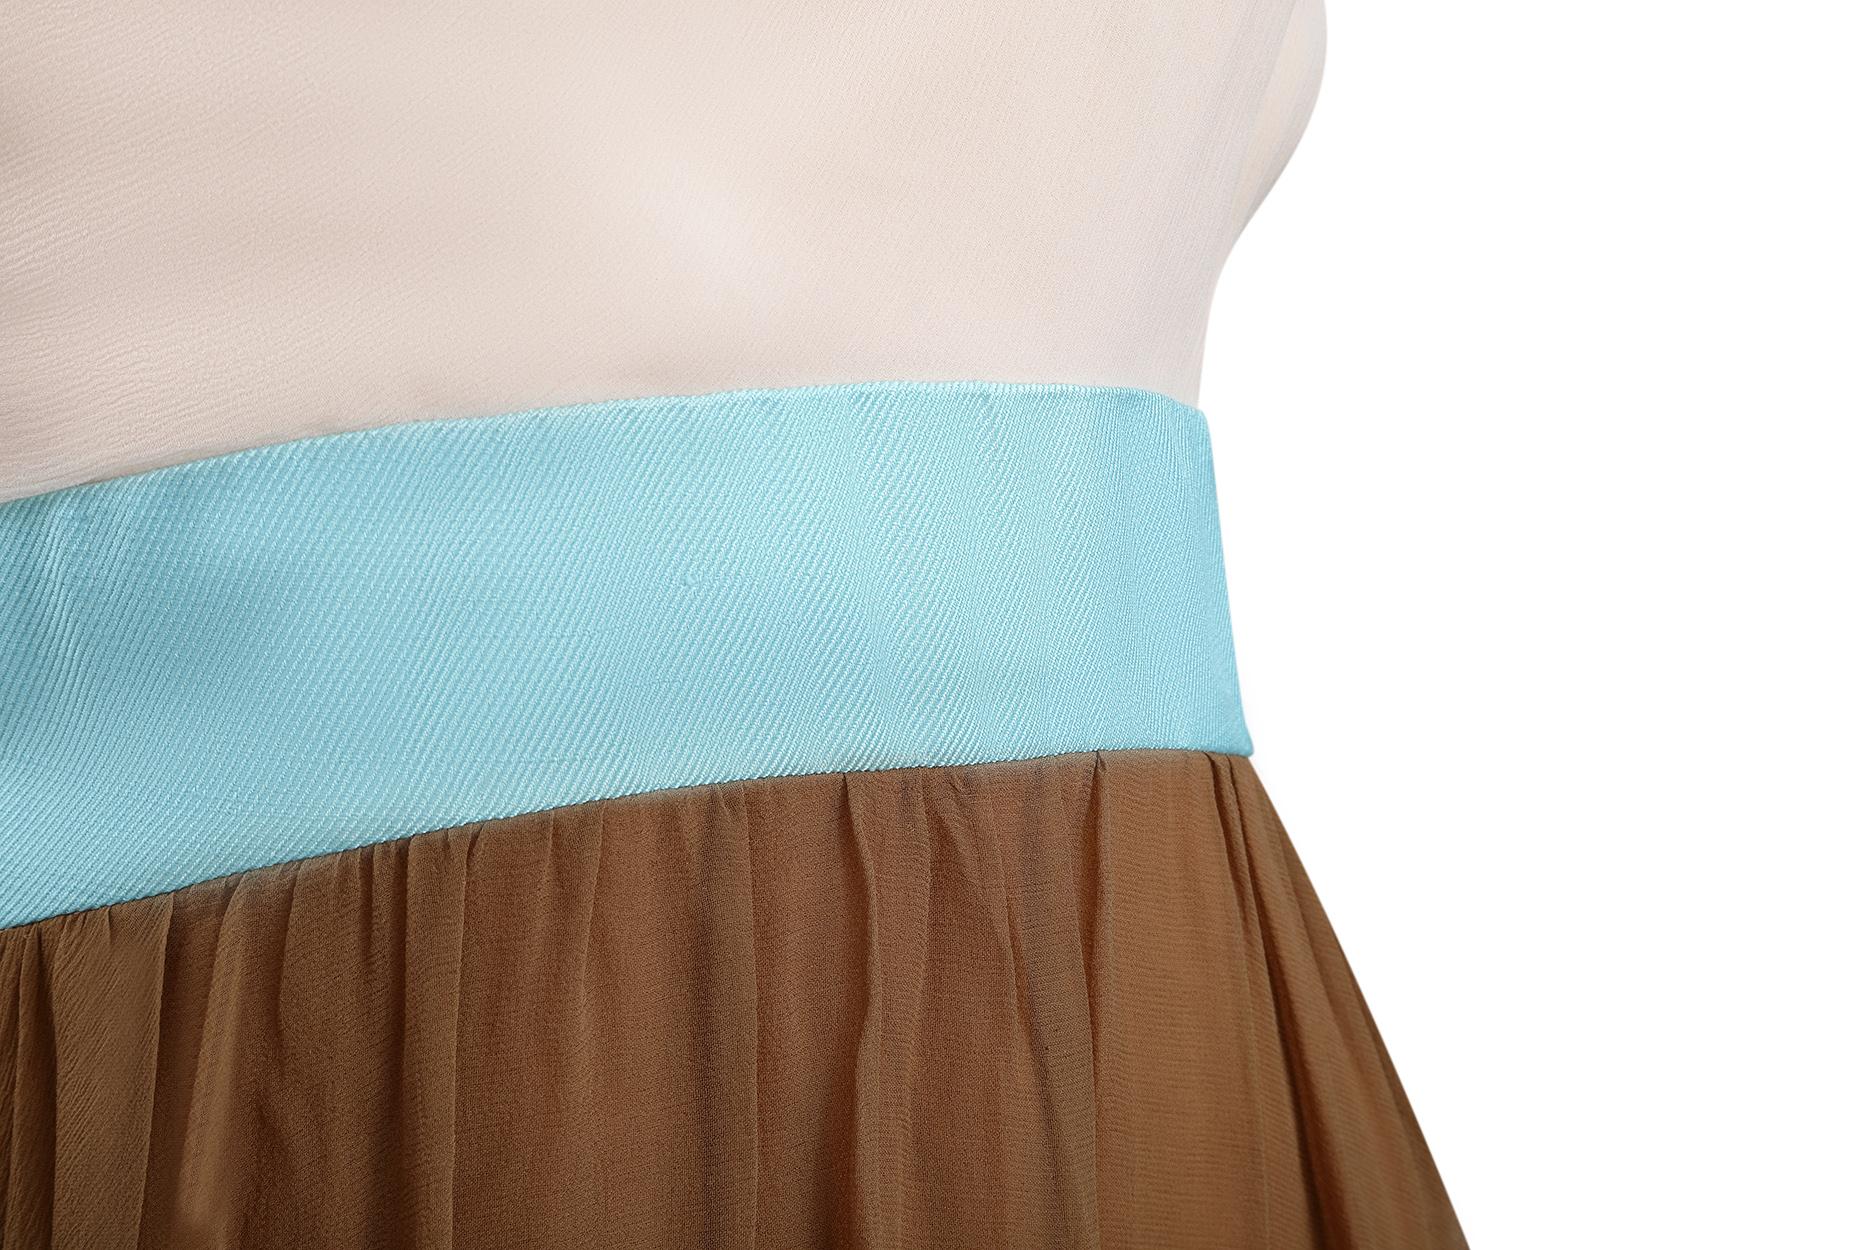 Brown 1960s Jeunesse Nude, Tan and Turquoise Chiffon Dress With Cowl Neckline